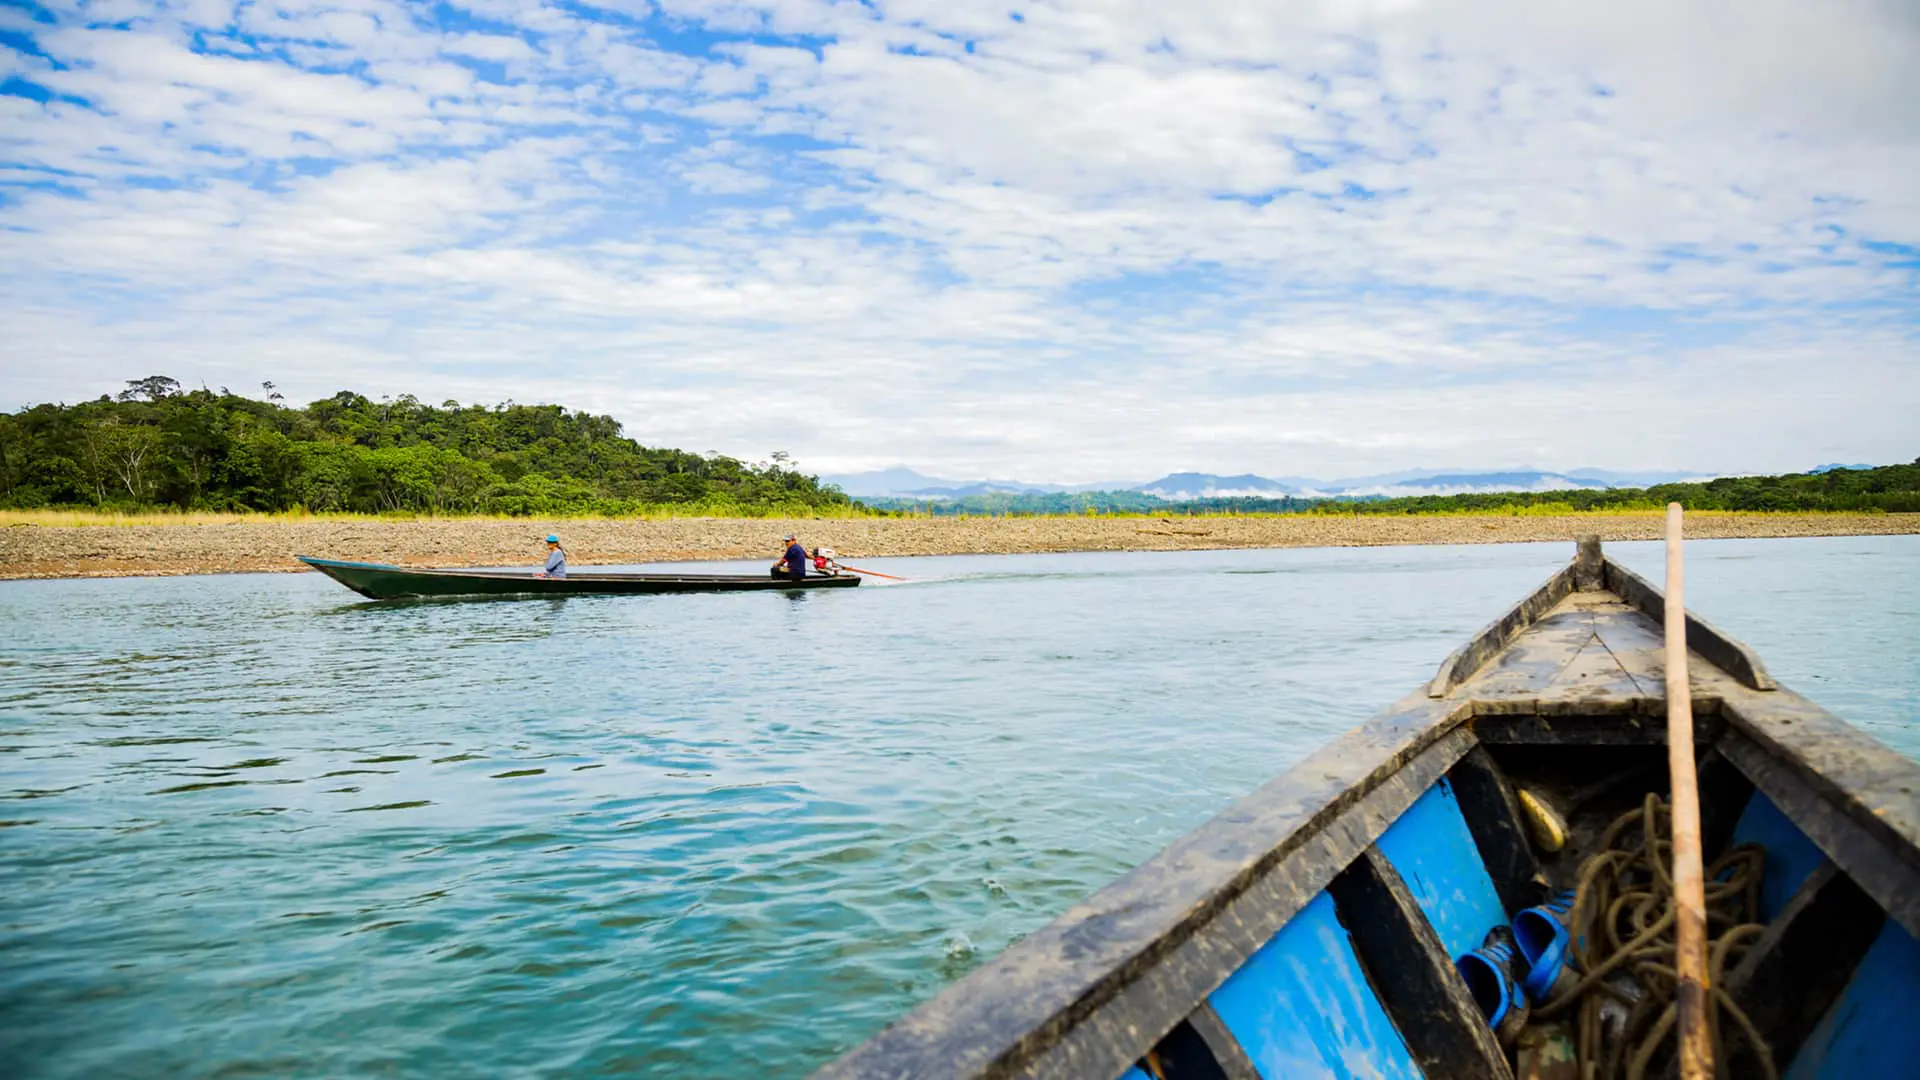 Boat view over the Alto Madre de Dios river departing from Shintuya's port | Responsible Travel Peru